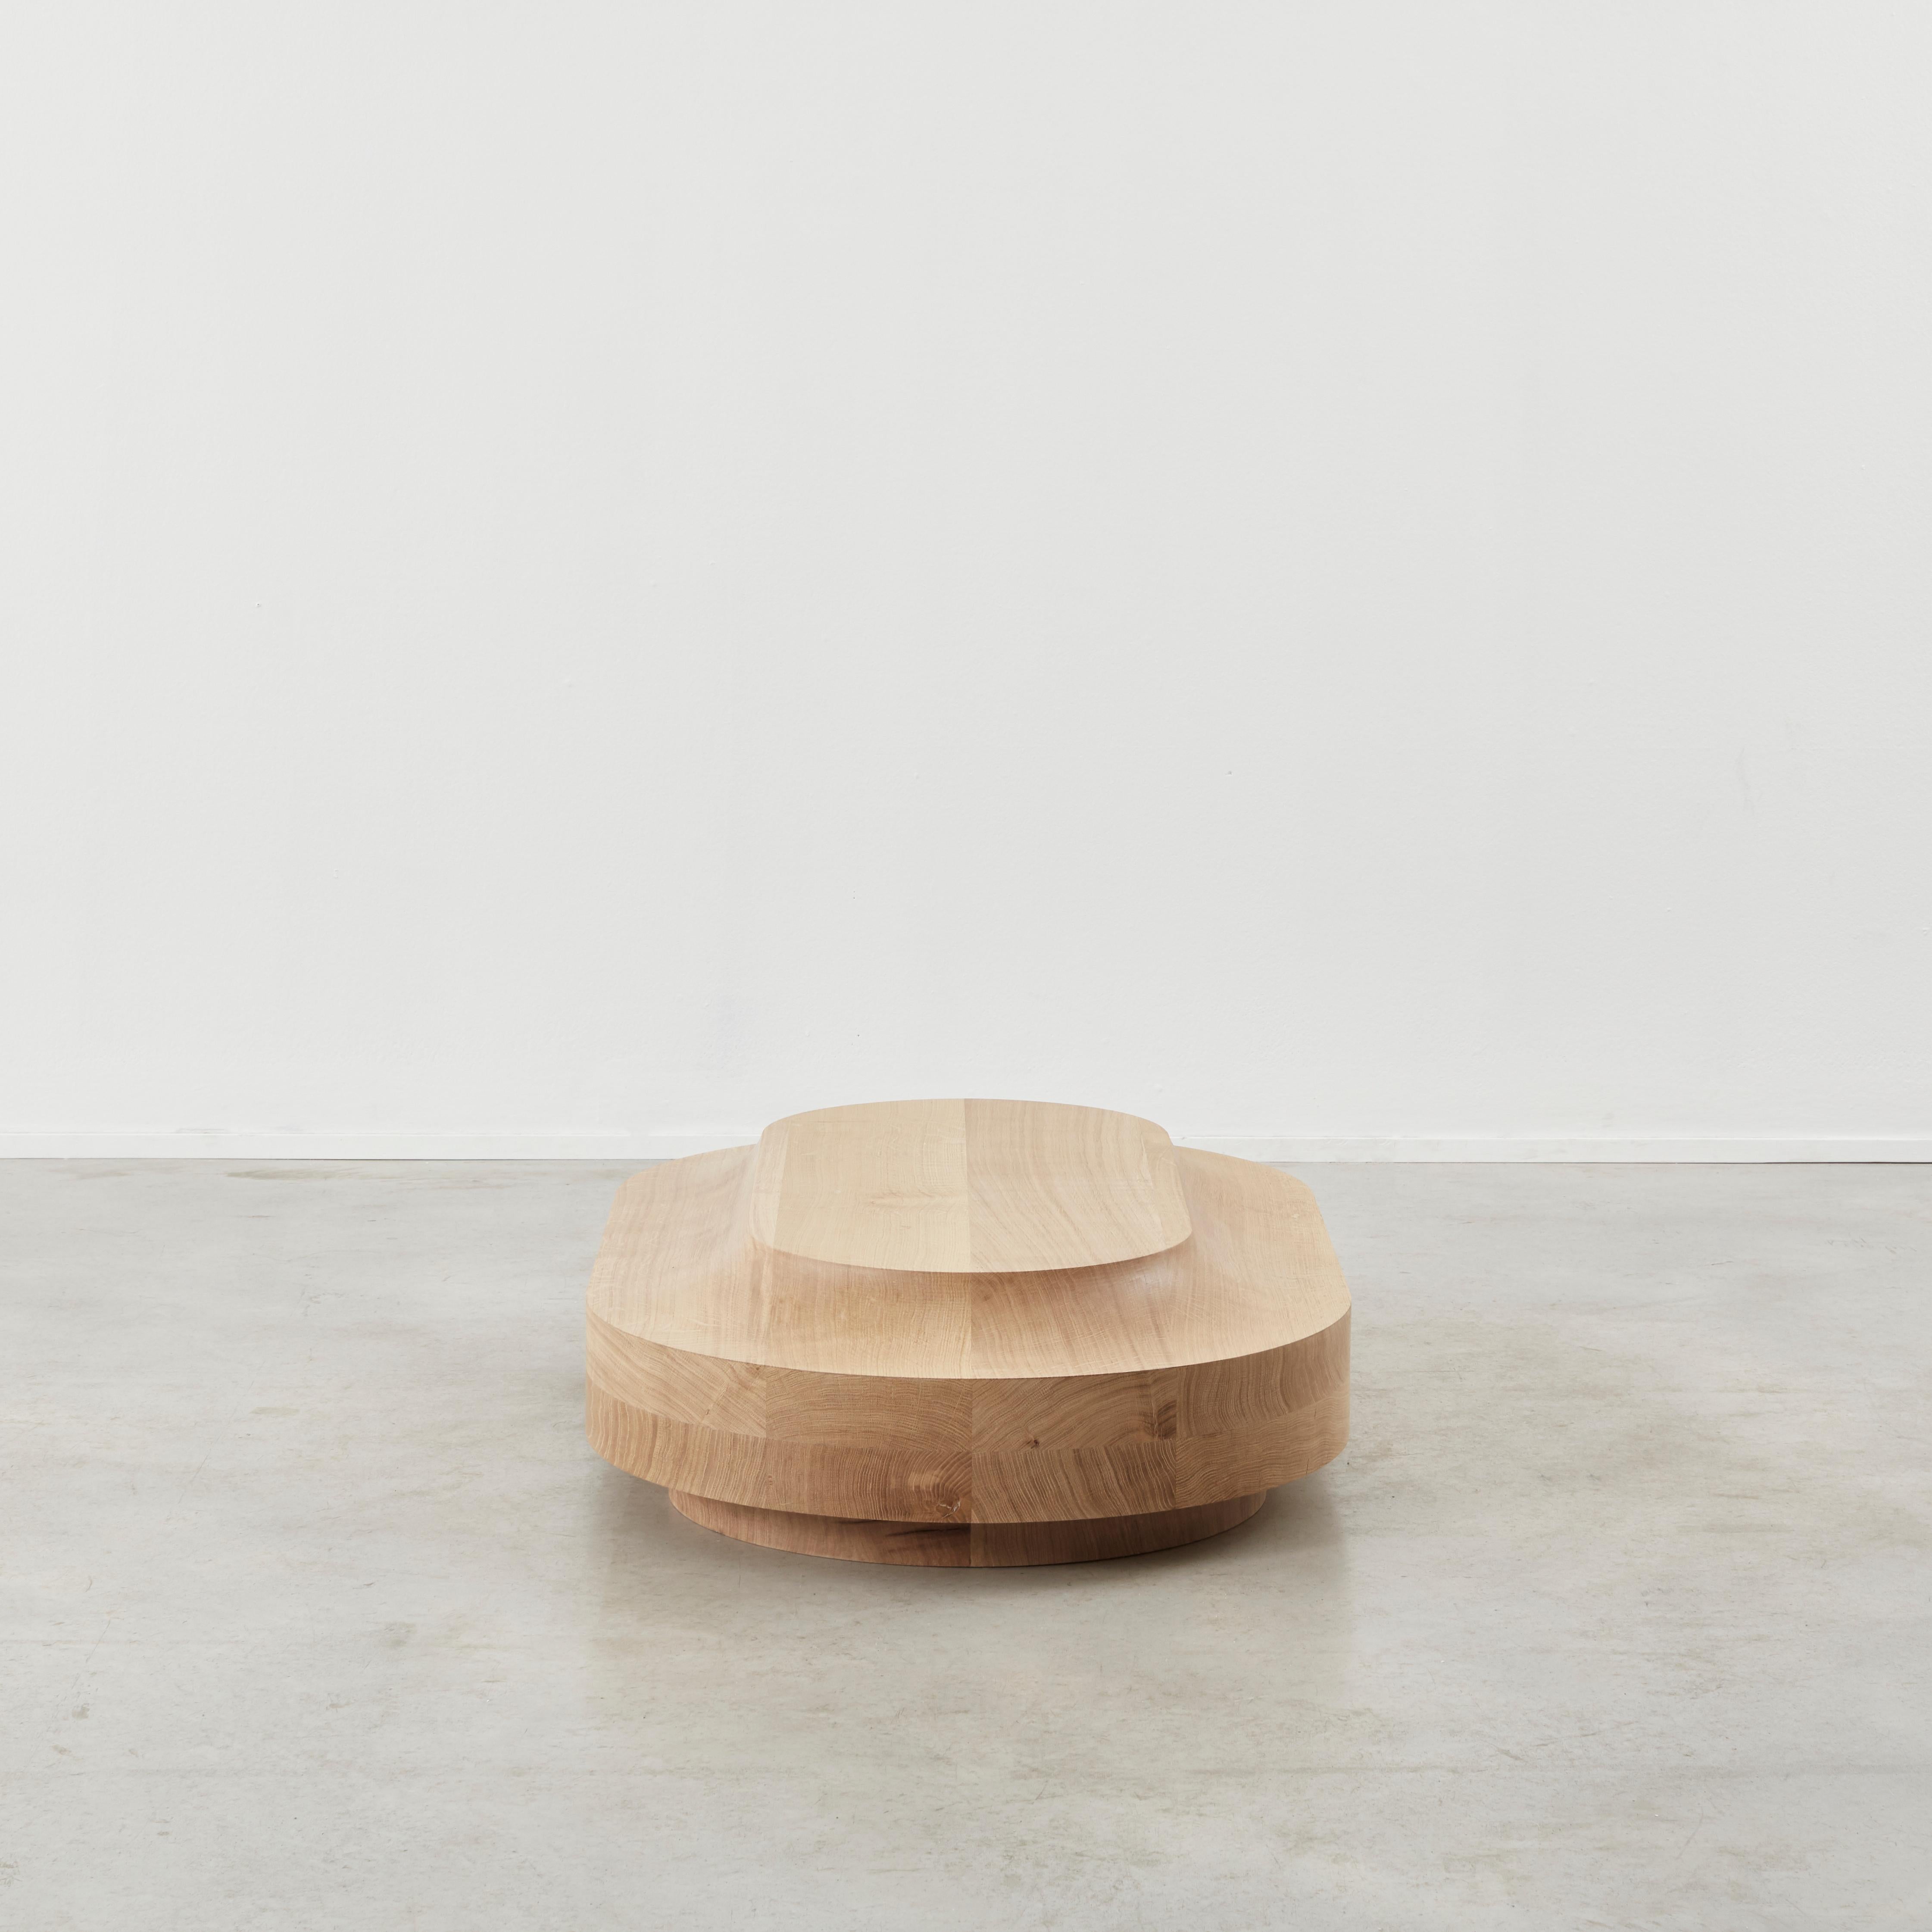 Benni Allan 'Low Table One' in oak by EBBA, UK, 2022 For Sale 1